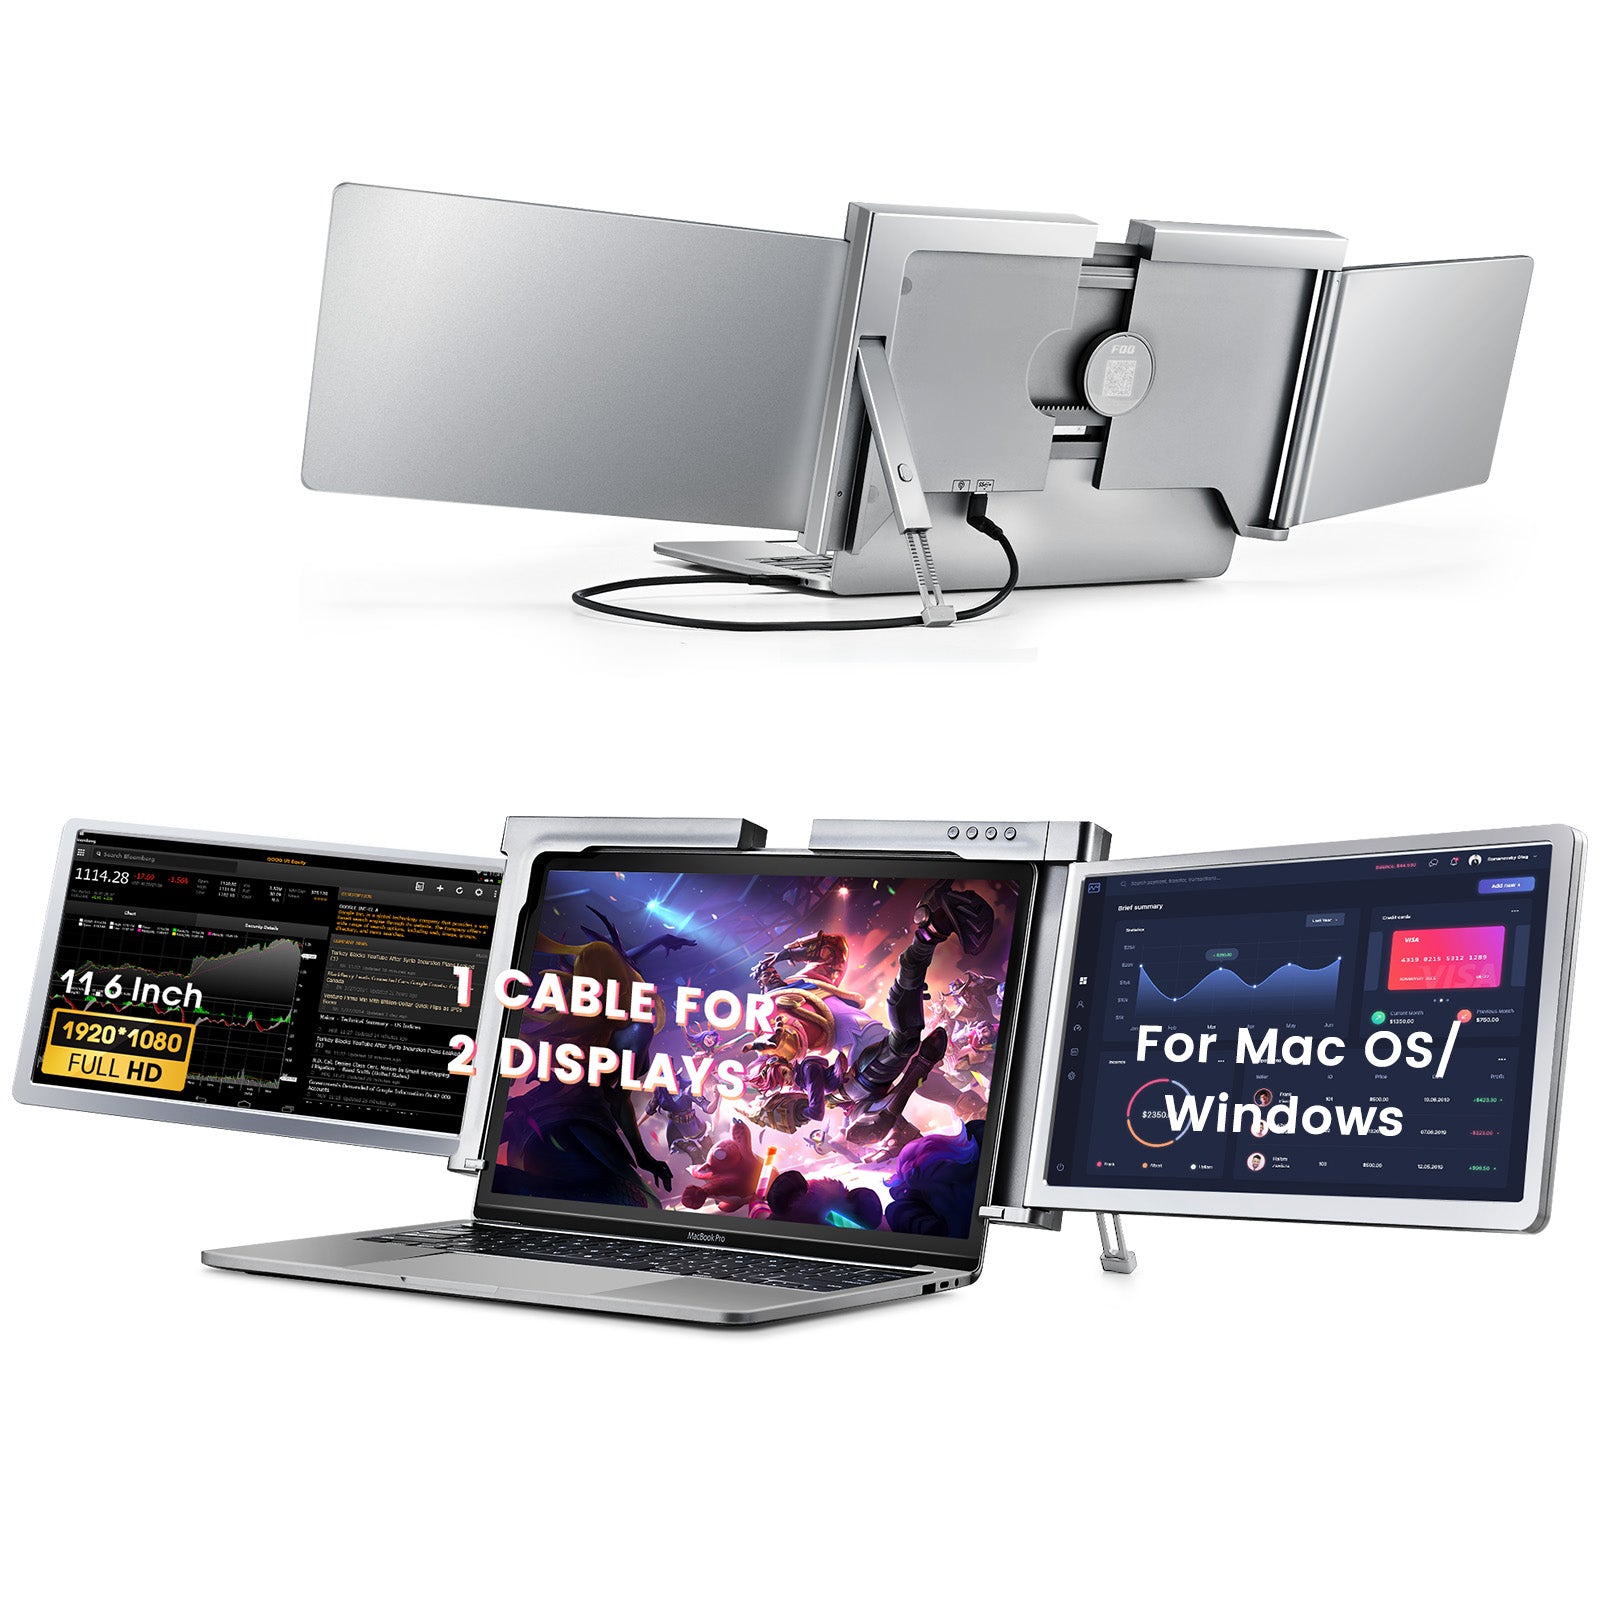 FQQ 11.6” 1080P Triple Portable Monitor - 1 Cable for 2 Displays-S100